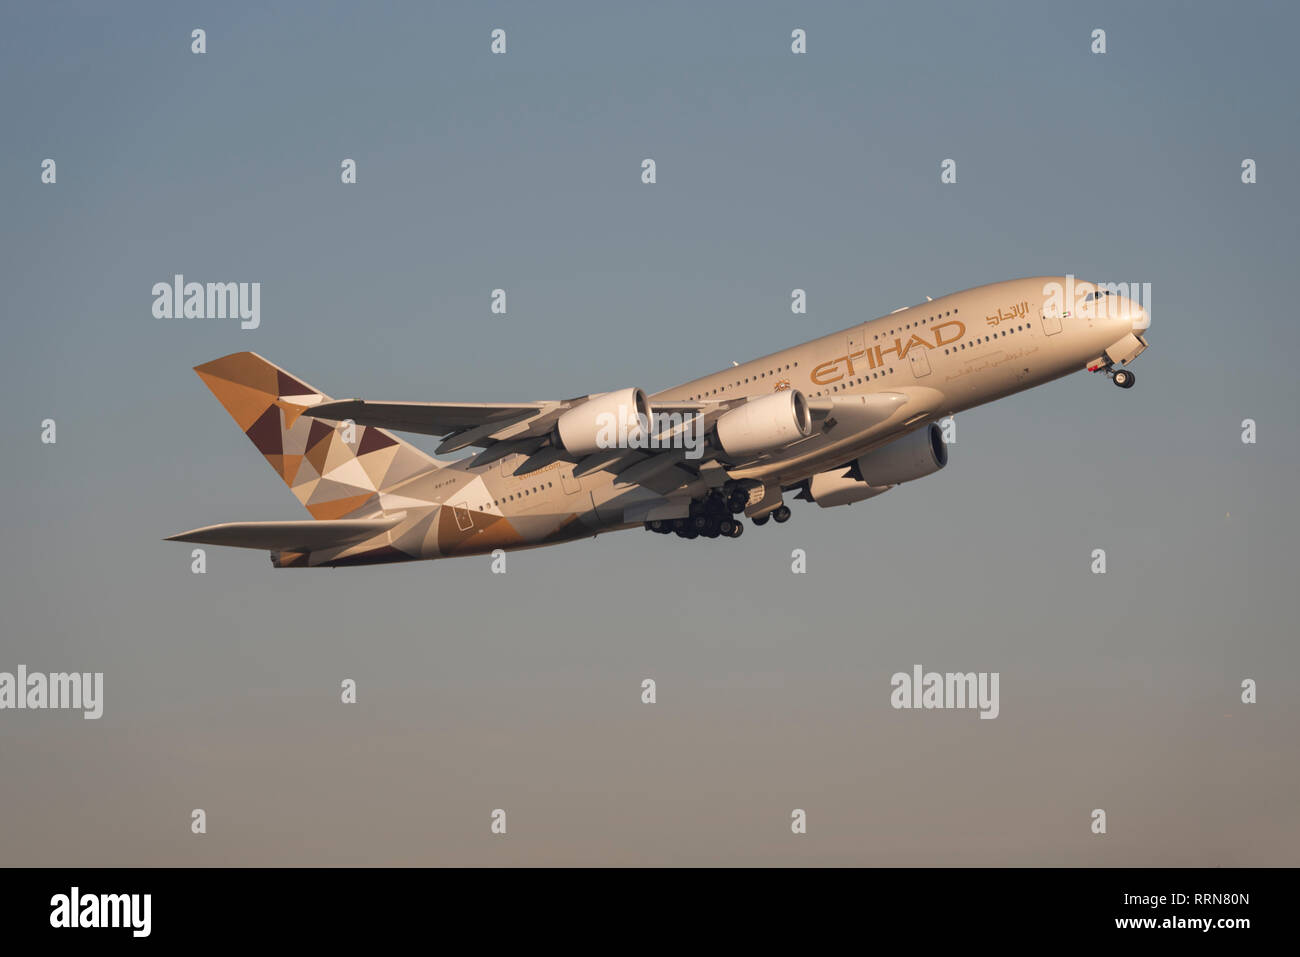 Etihad Airways Airbus A380 jet airliner plane A6-APB taking off from London Heathrow Airport, UK. Airline flight departure Stock Photo